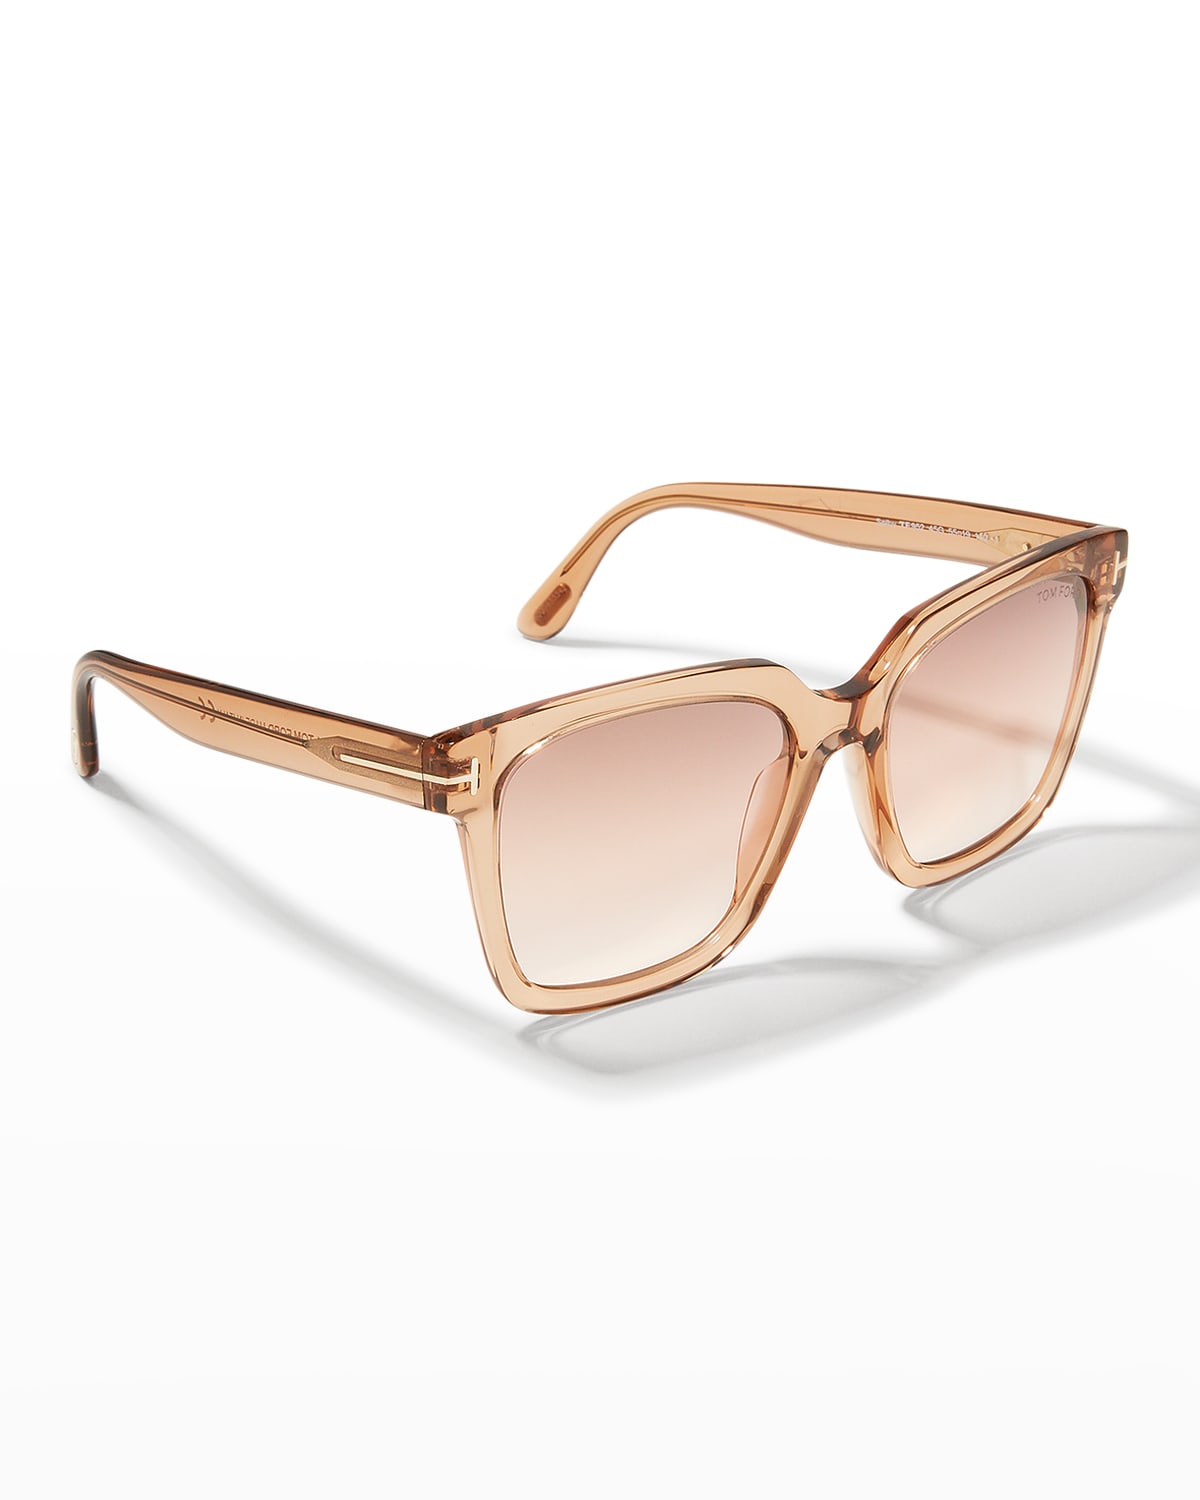 TOM FORD SELBY SQUARE ACETATE SUNGLASSES